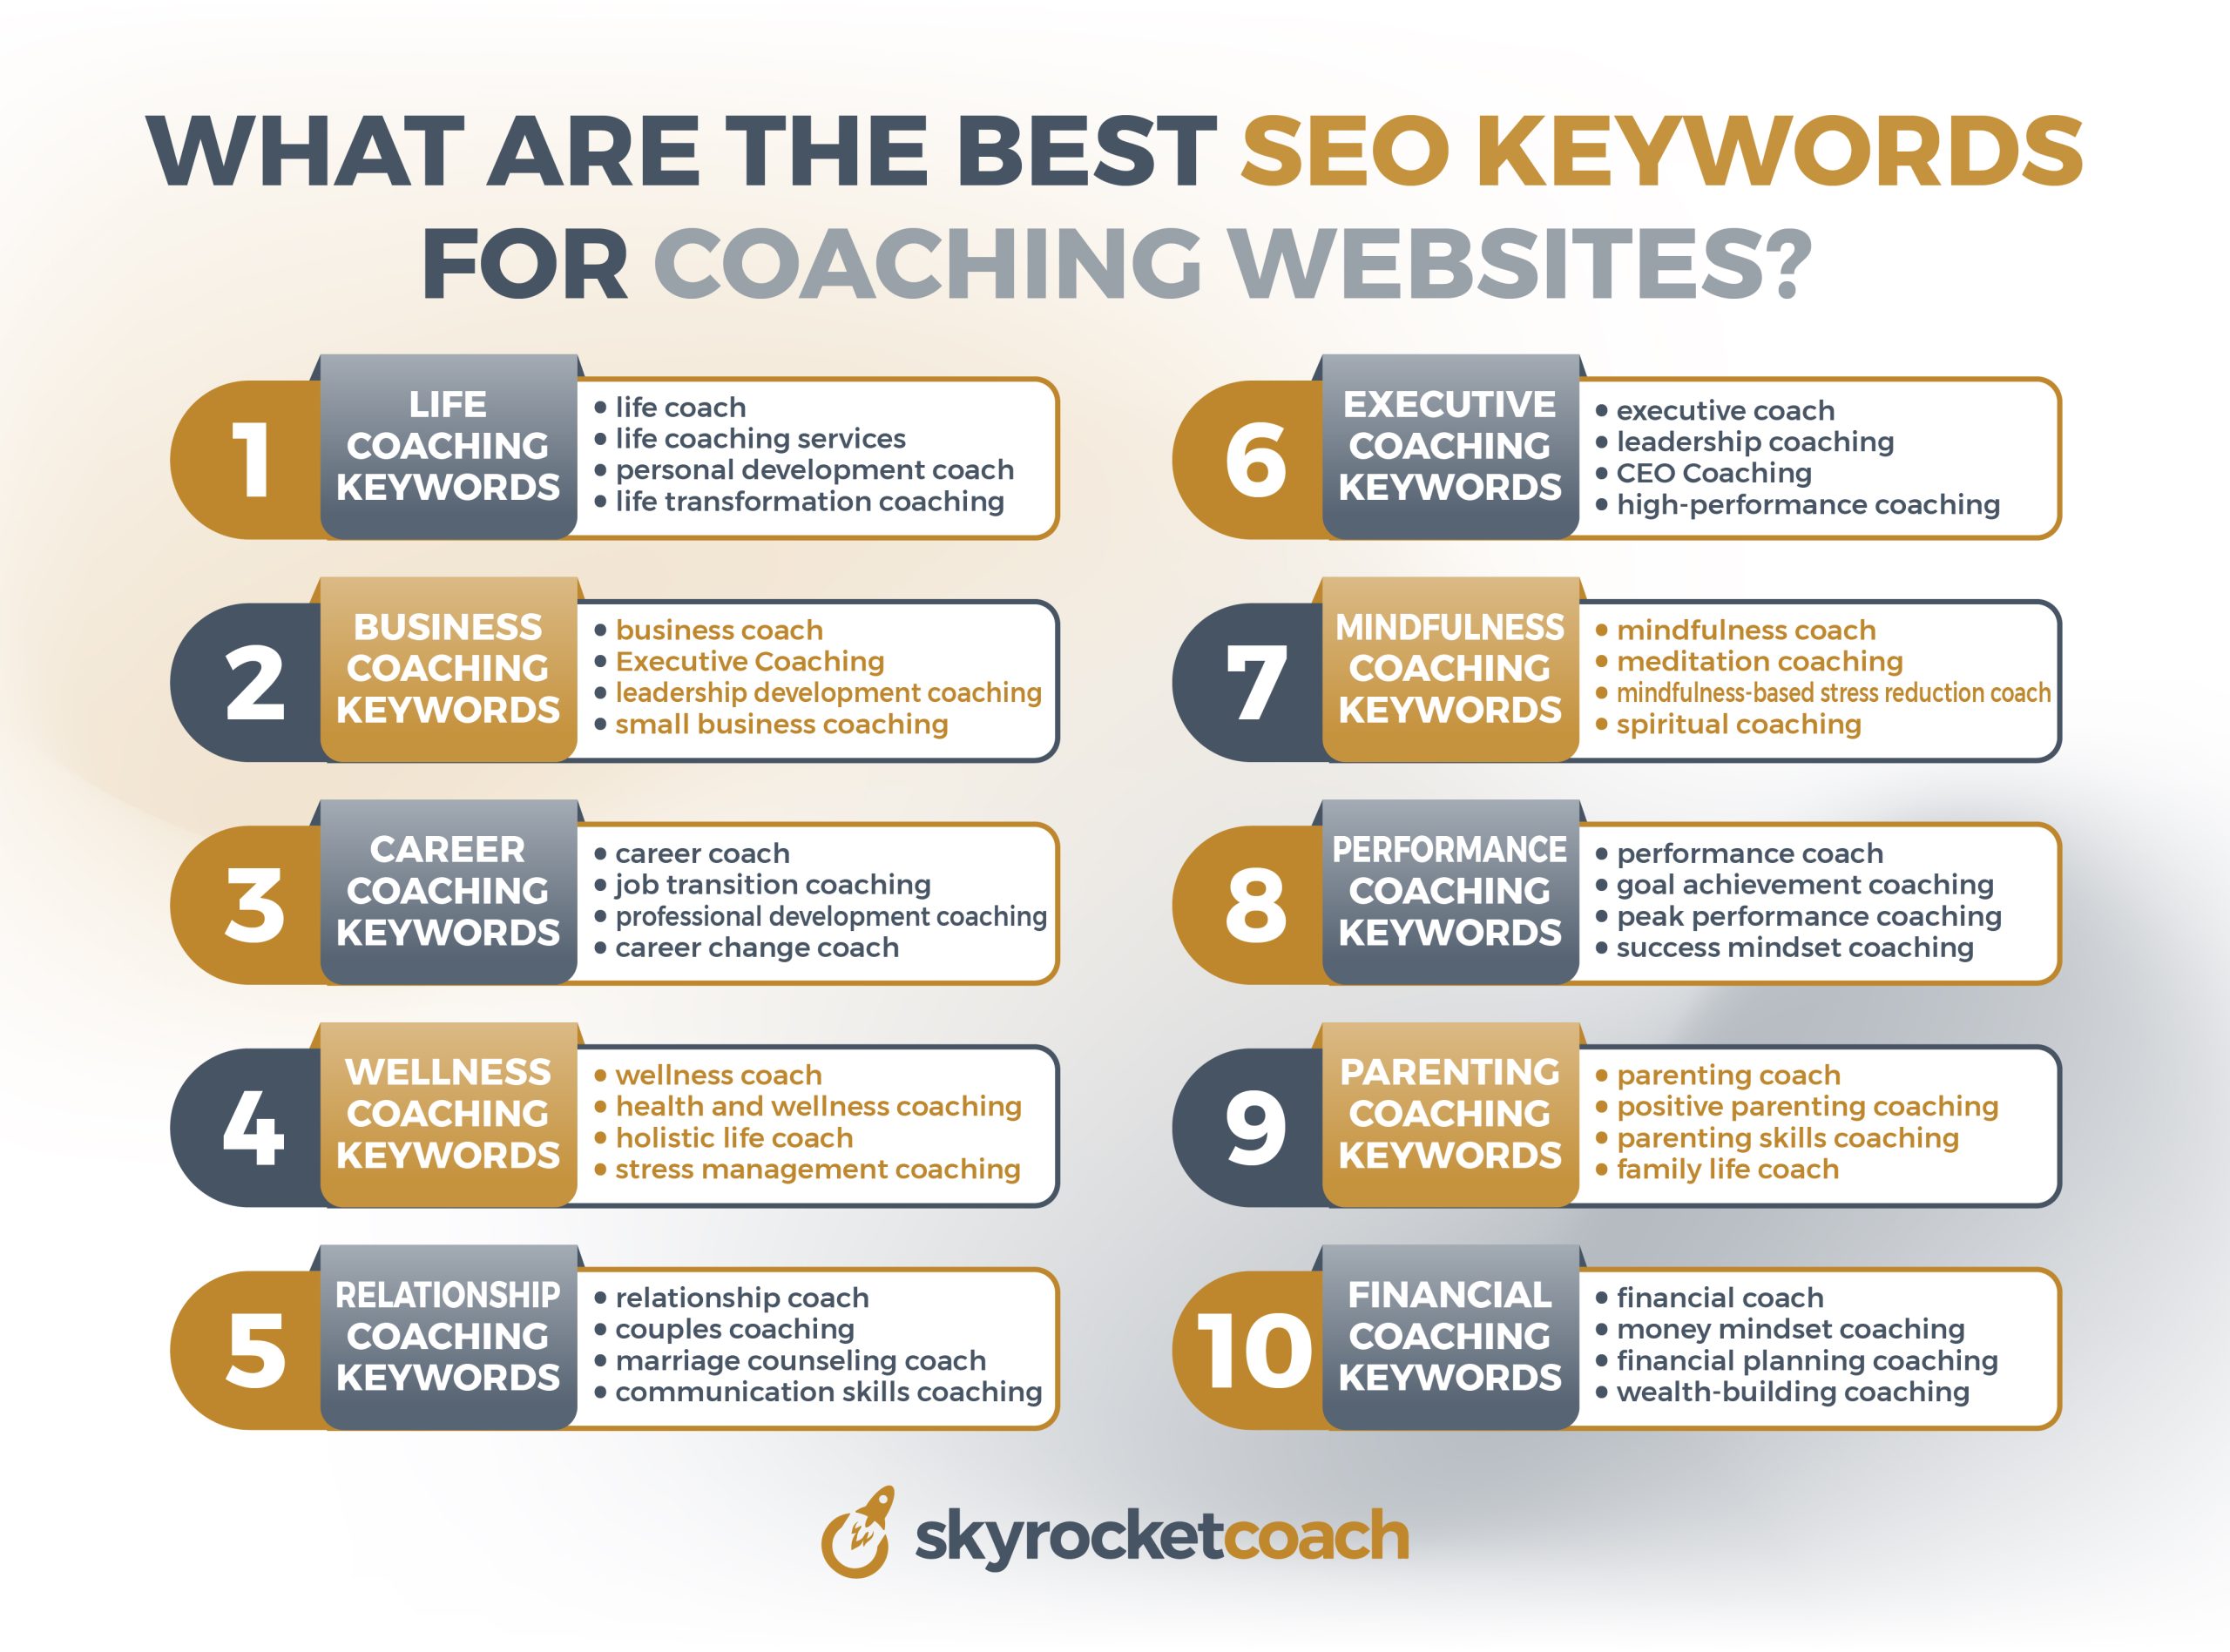 What Are The Best SEO Keywords For Coaching Websites